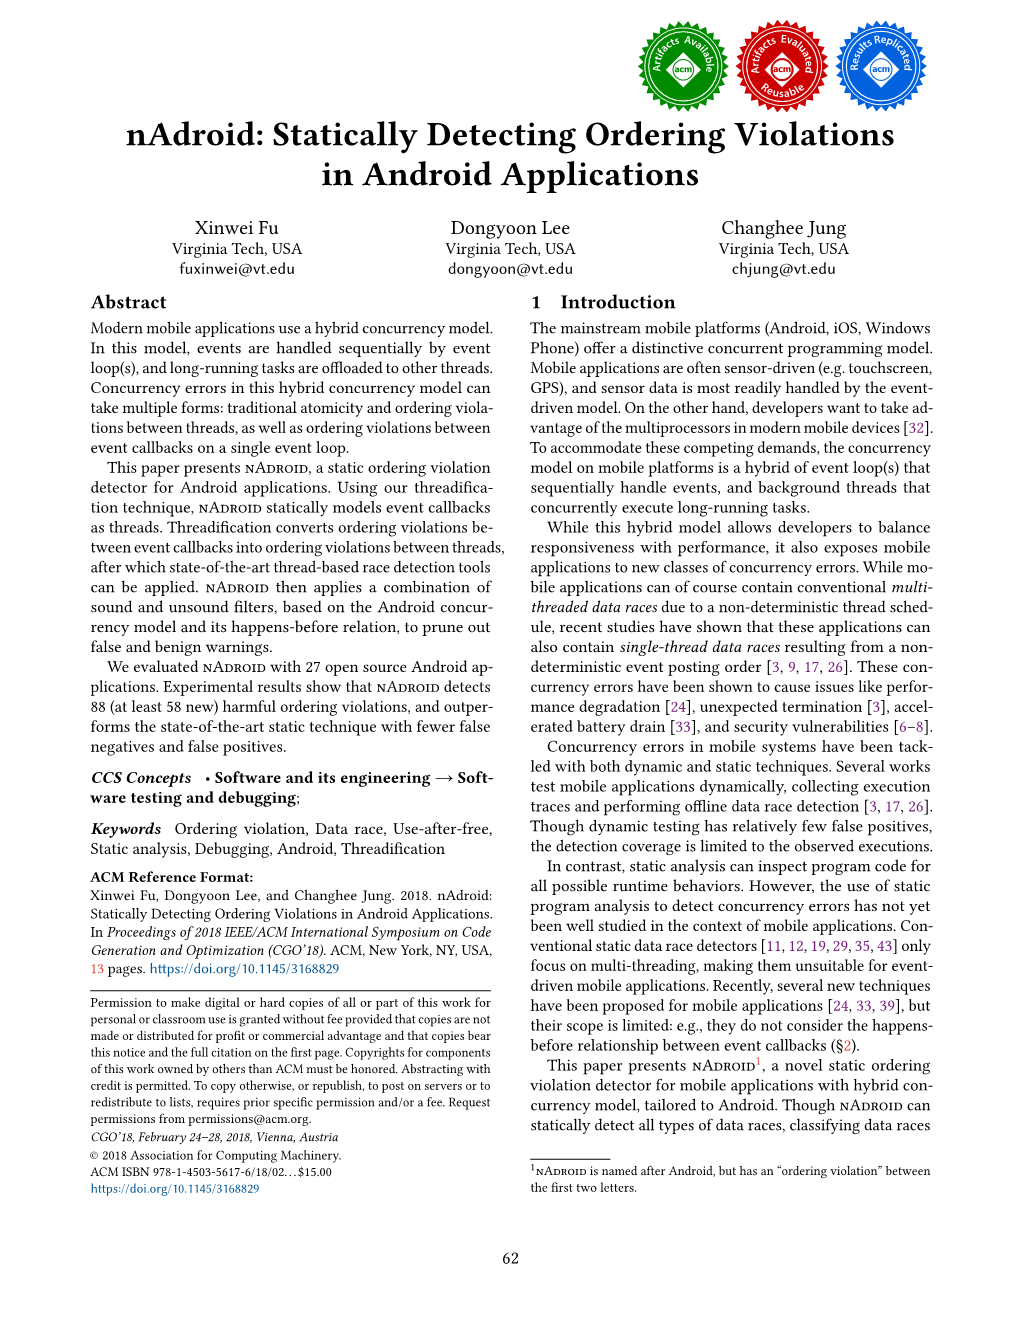 Nadroid: Statically Detecting Ordering Violations in Android Applications